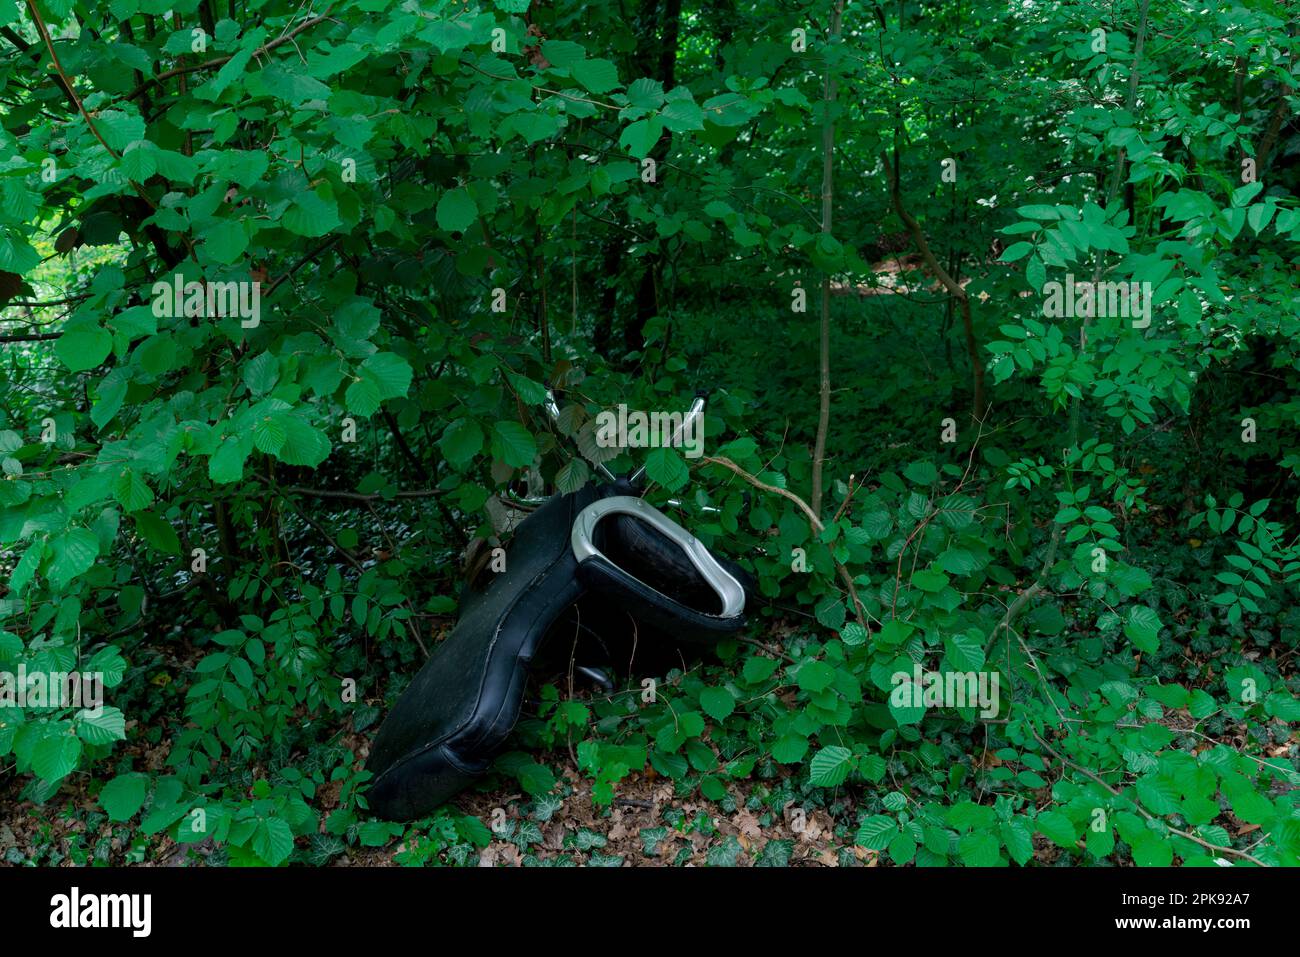 Pollution, illegally disposed black office swivel chair in a forest Stock Photo